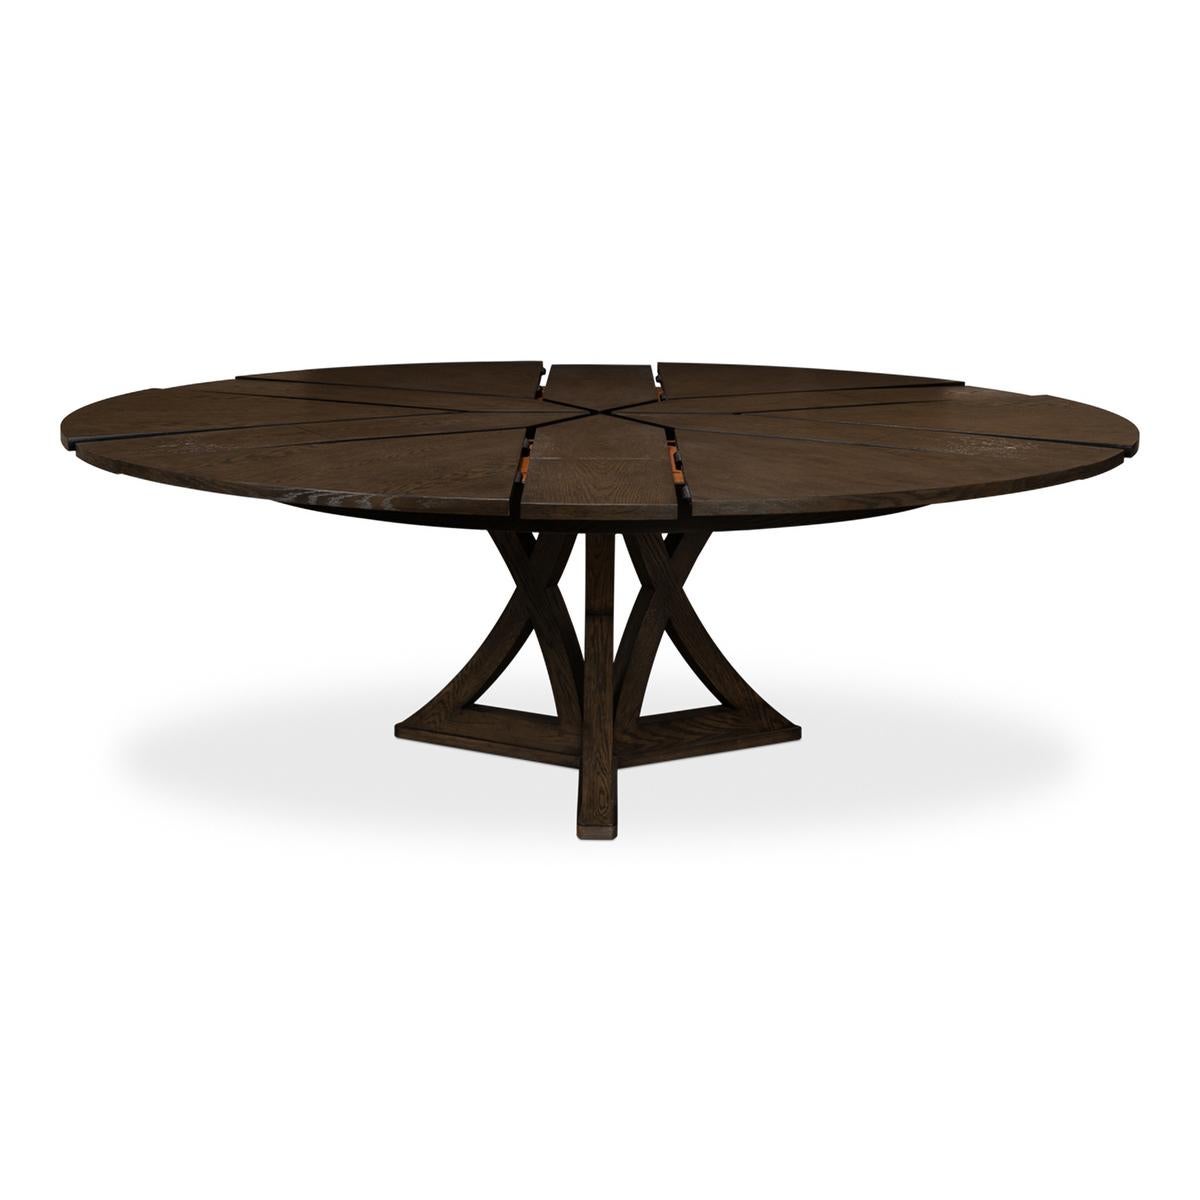 Rustic Round Dining Table, Artisan Grey In New Condition For Sale In Westwood, NJ